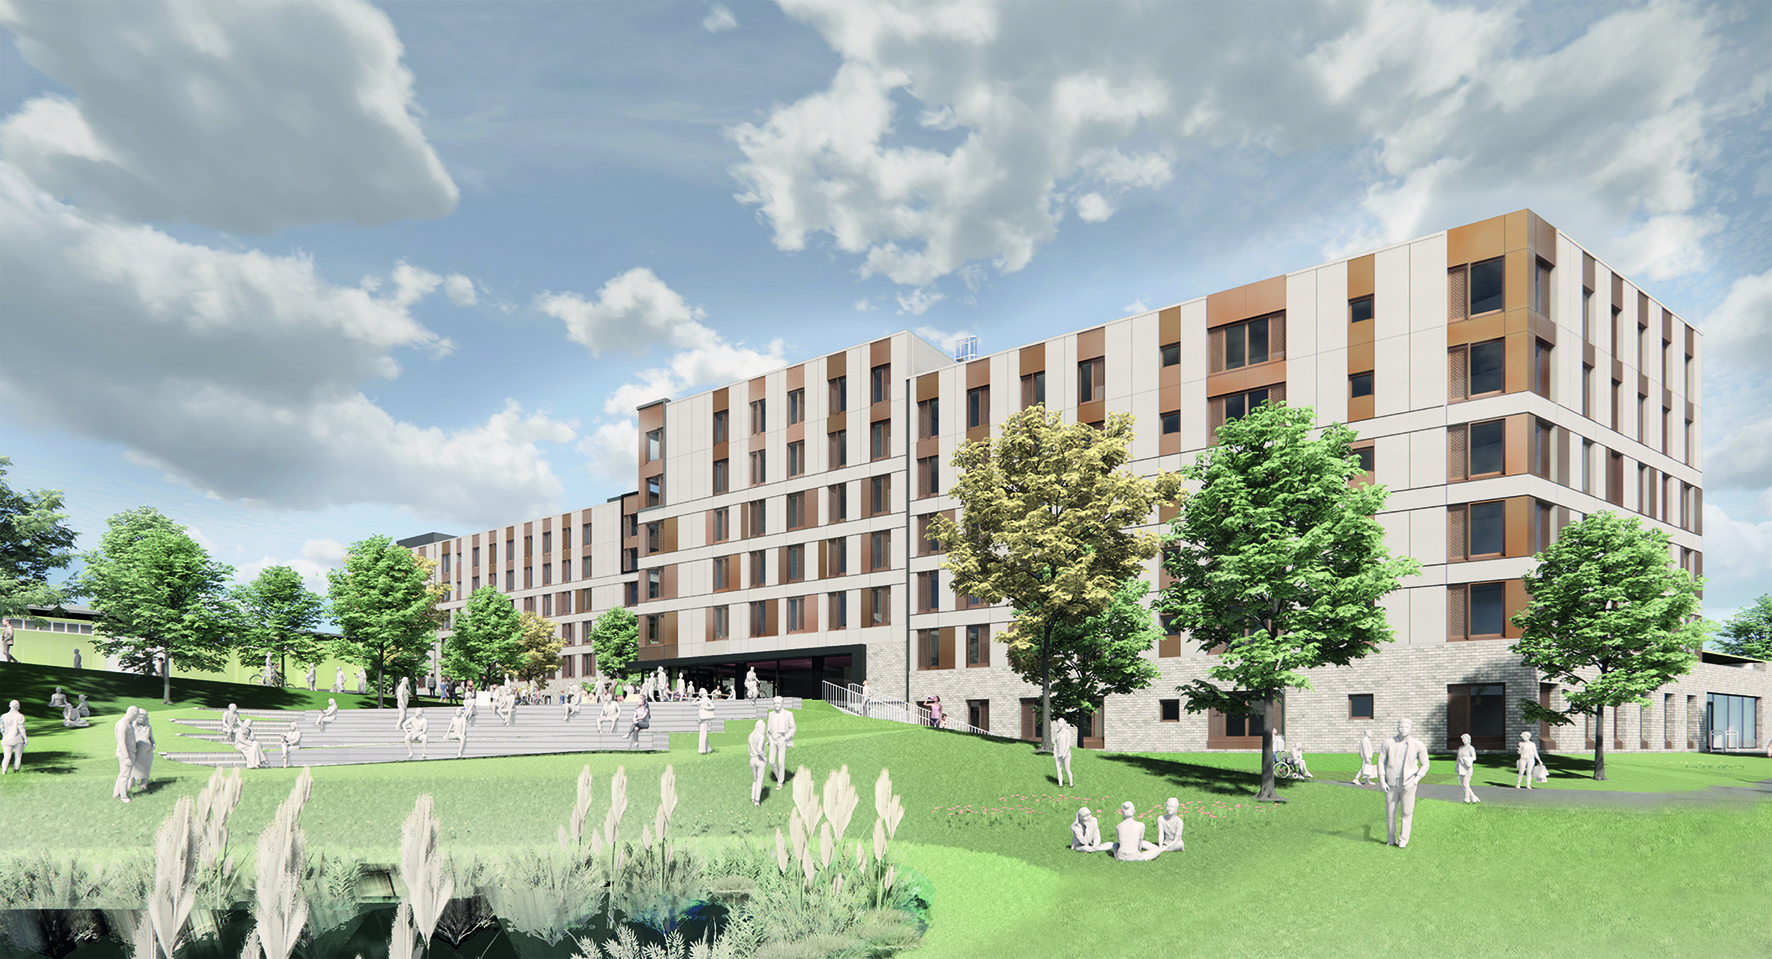 AIM’s cavity barriers selected for ‘path-breaking’ university accommodation